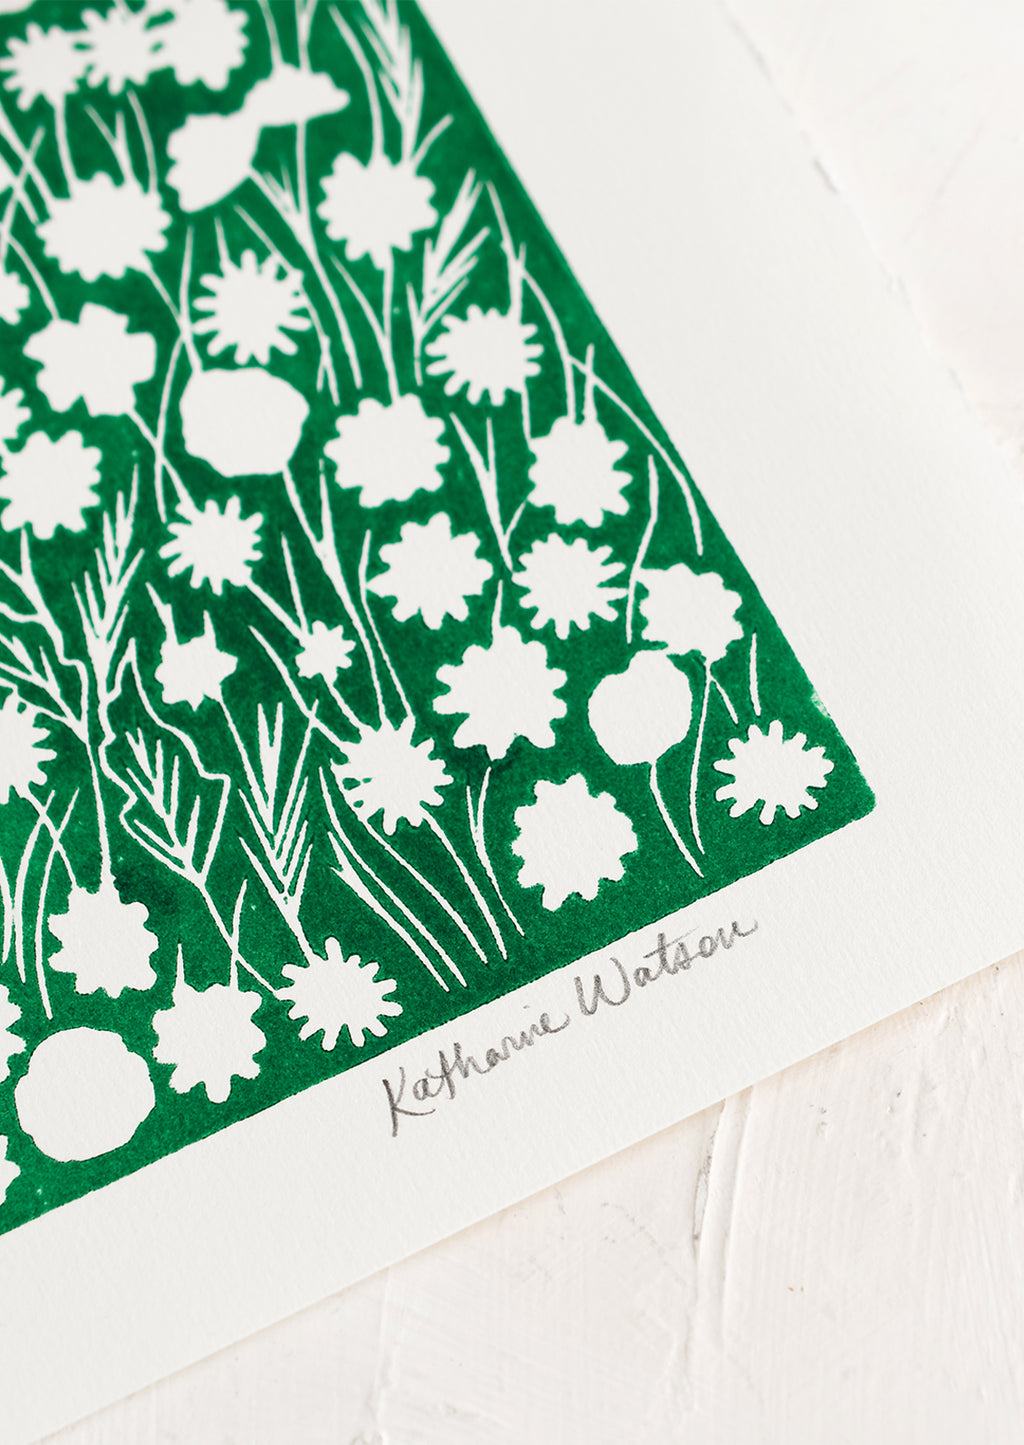 2: A block printed art print on deckled edge paper with green box with white flowers.